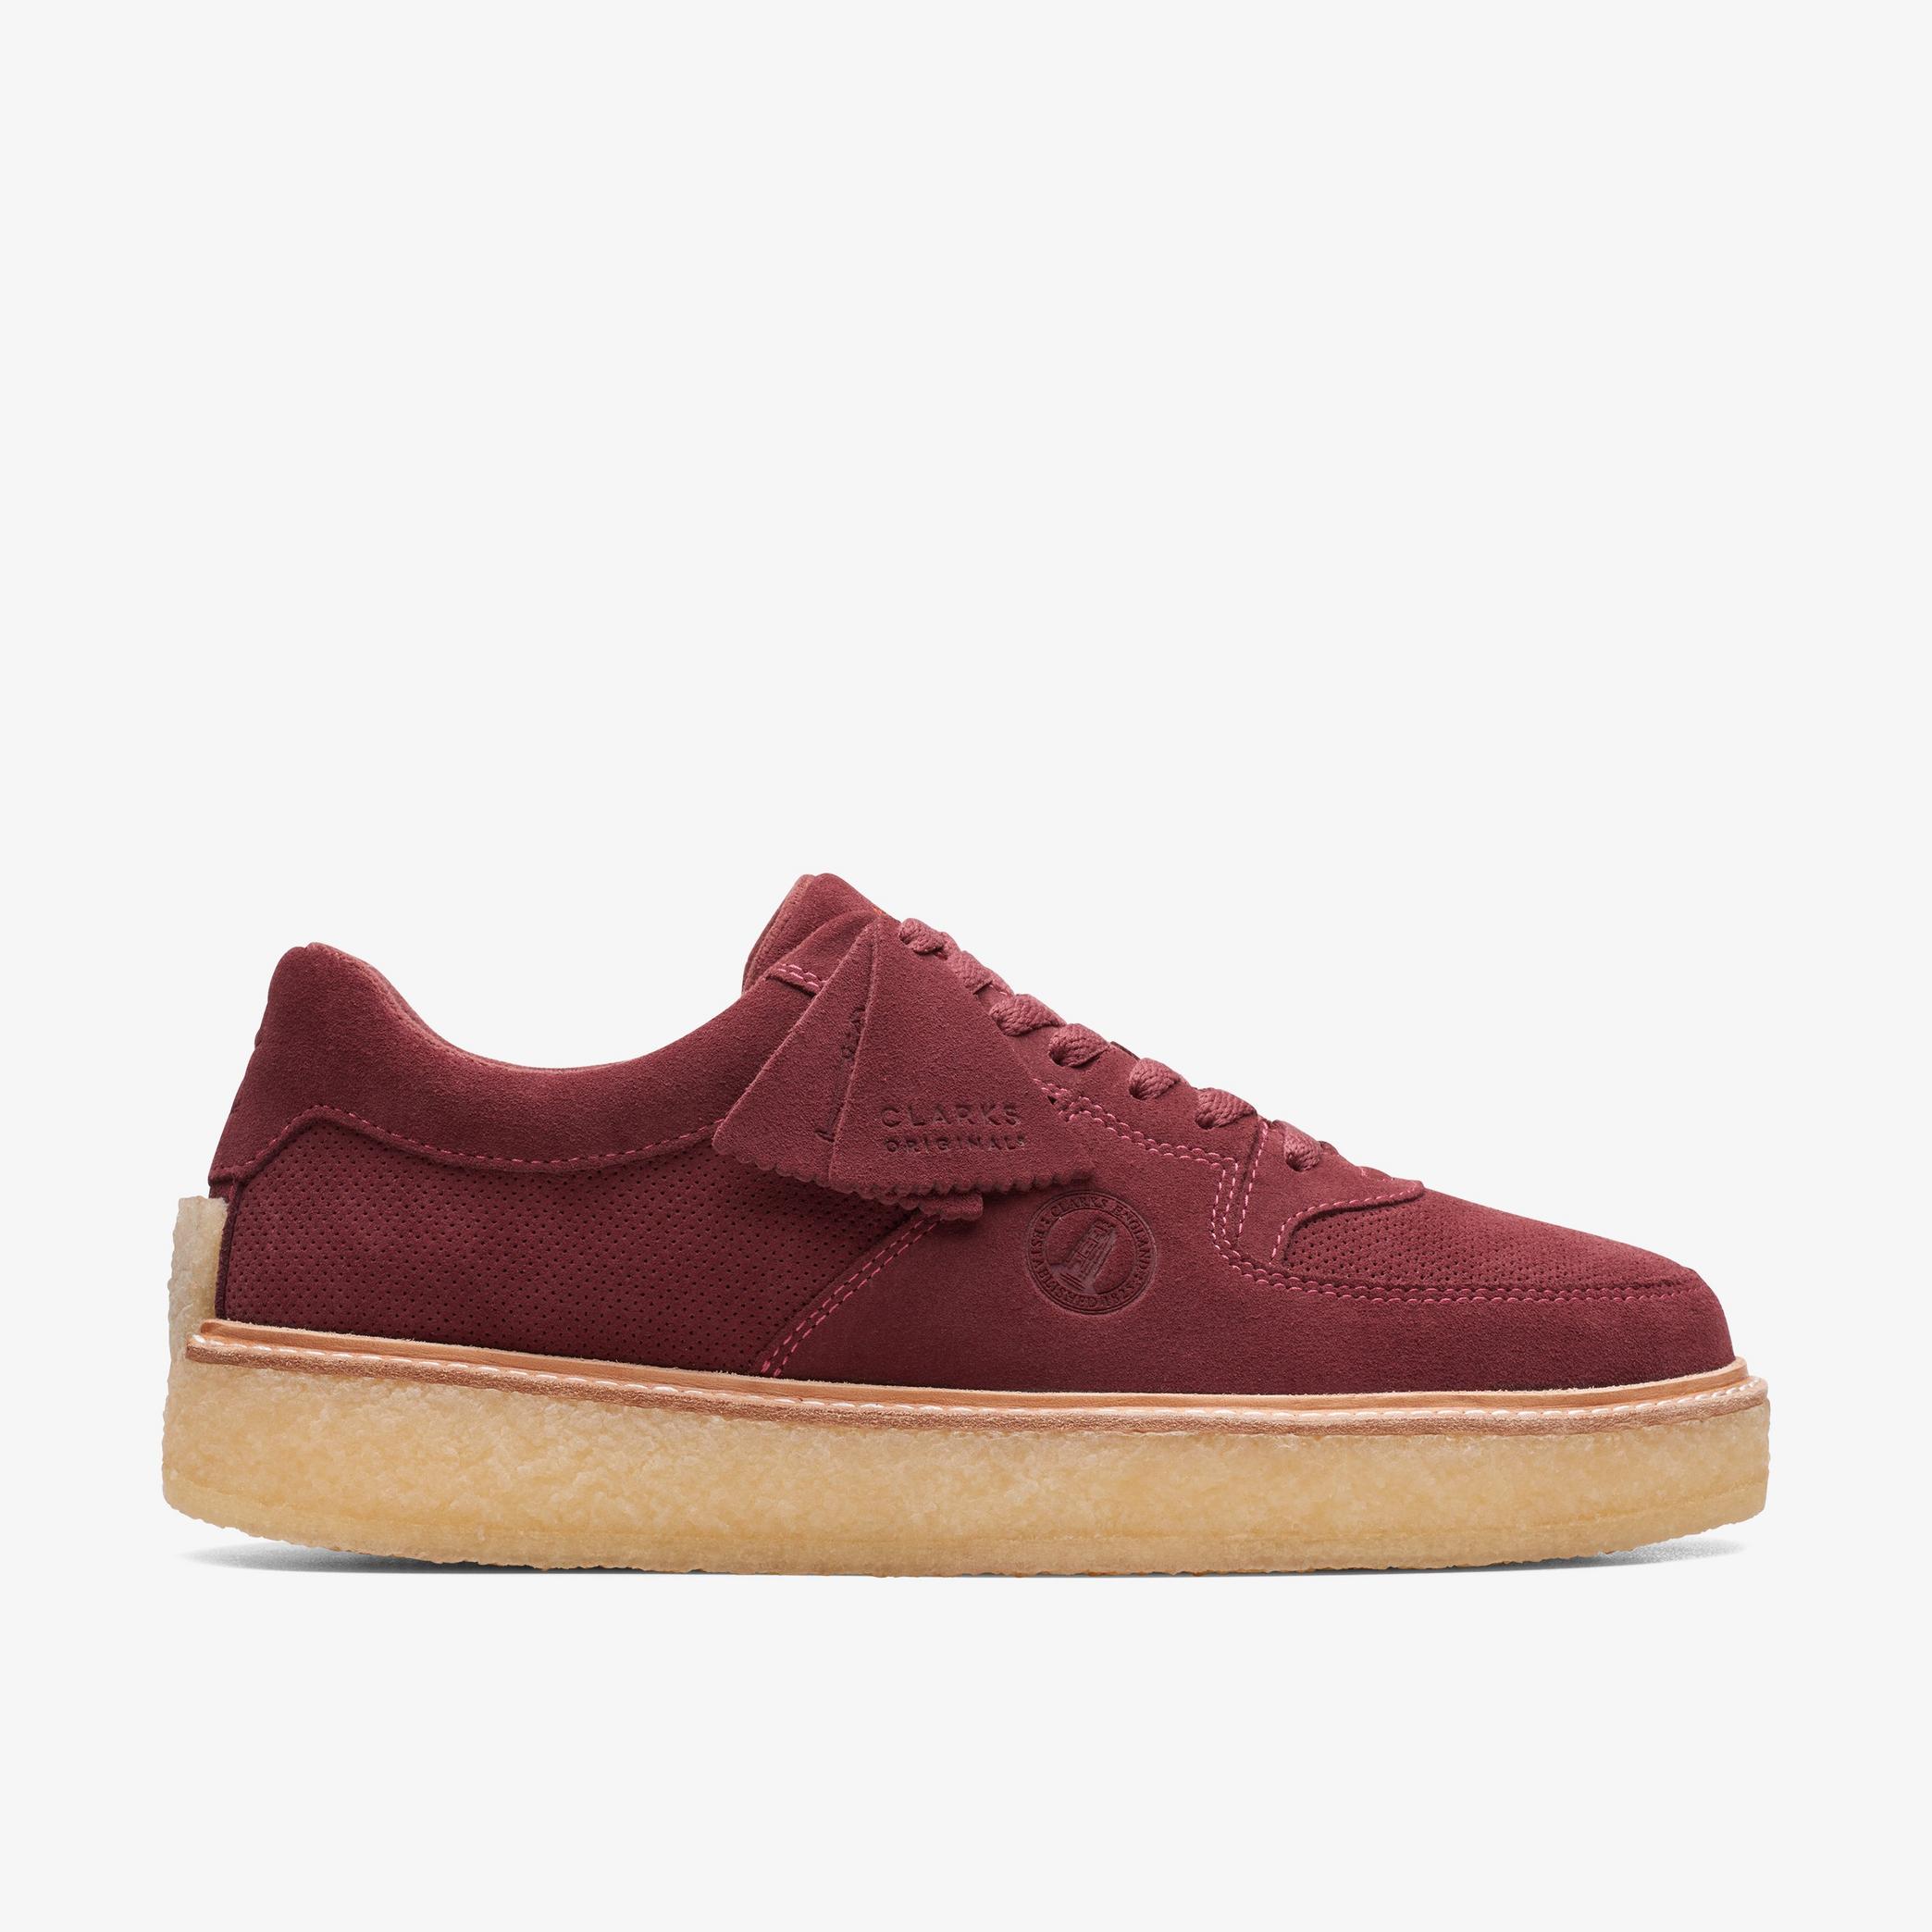 Sandford Oxblood Trainers, view 1 of 7